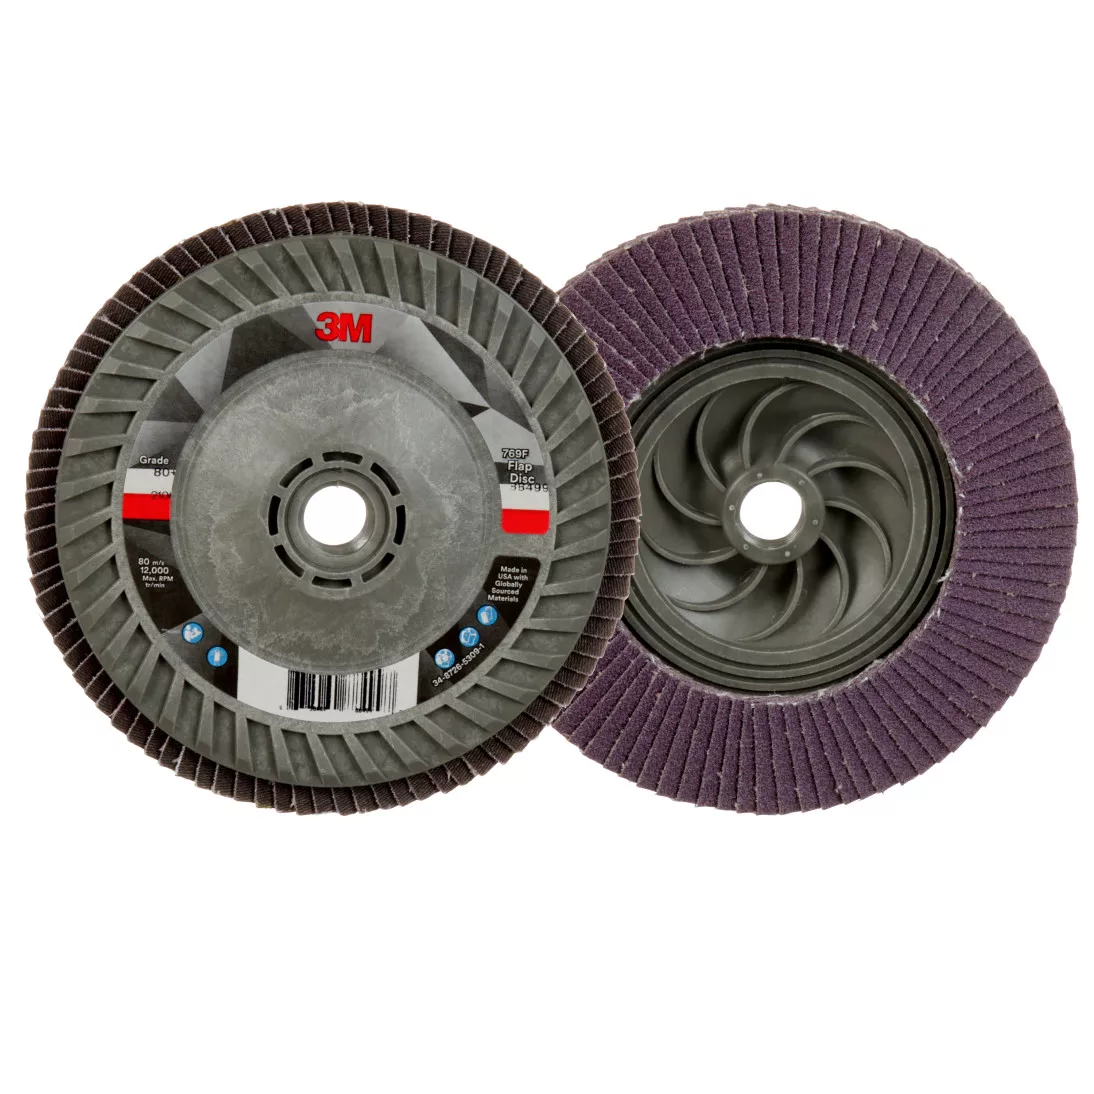 3M™ Flap Disc 769F, 80+, Quick Change, Type 29, 5 in x 5/8 in-11, 10
ea/Case